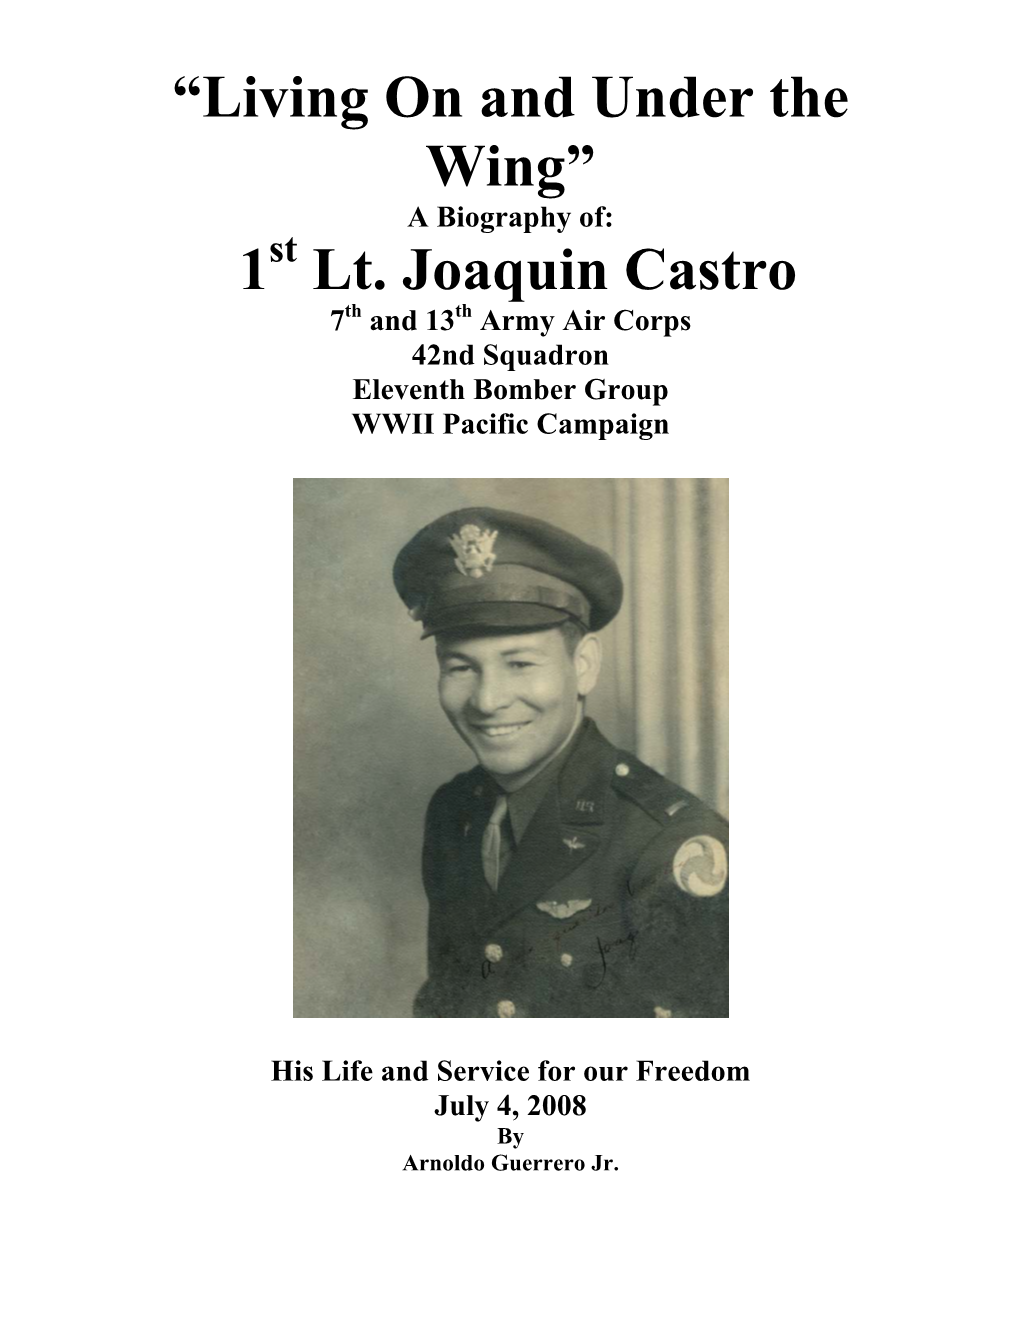 “Living on and Under the Wing” a Biography Of: 1St Lt